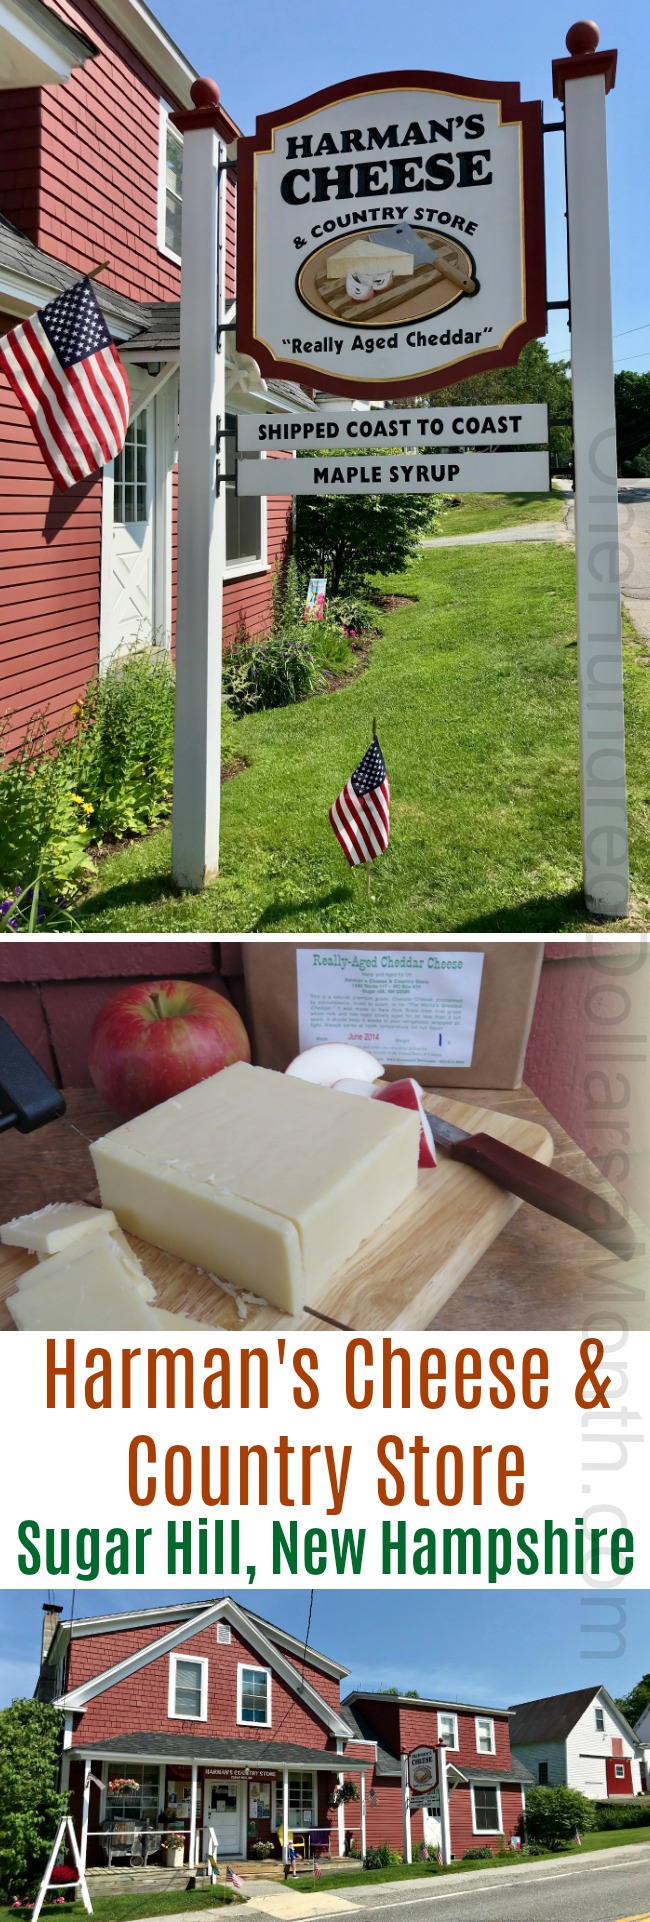 Harman’s Cheese & Country Store in Sugar Hill, New Hampshire